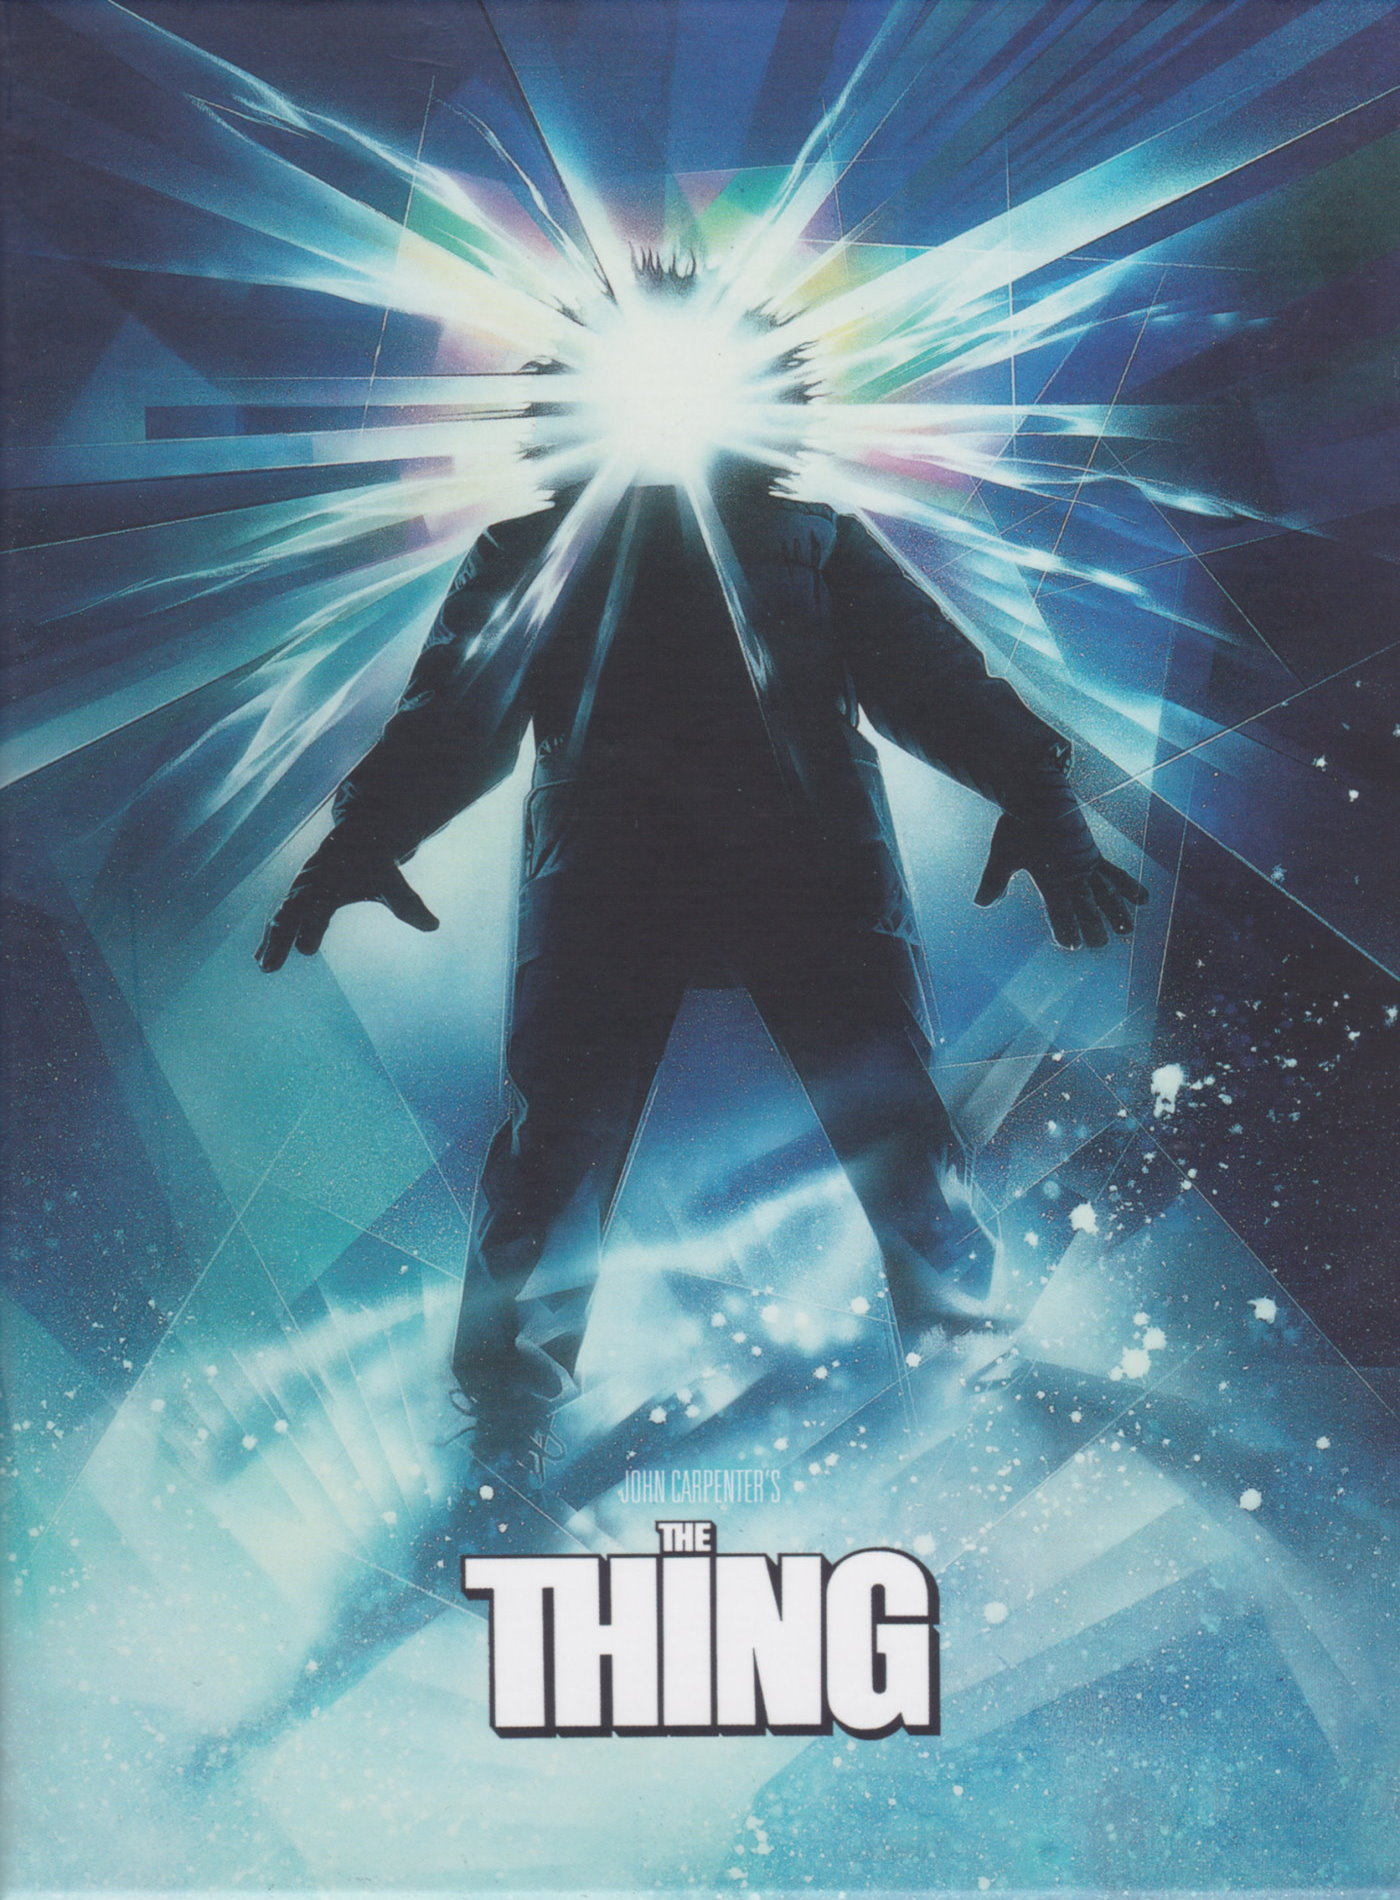 Cover - The Thing.jpg